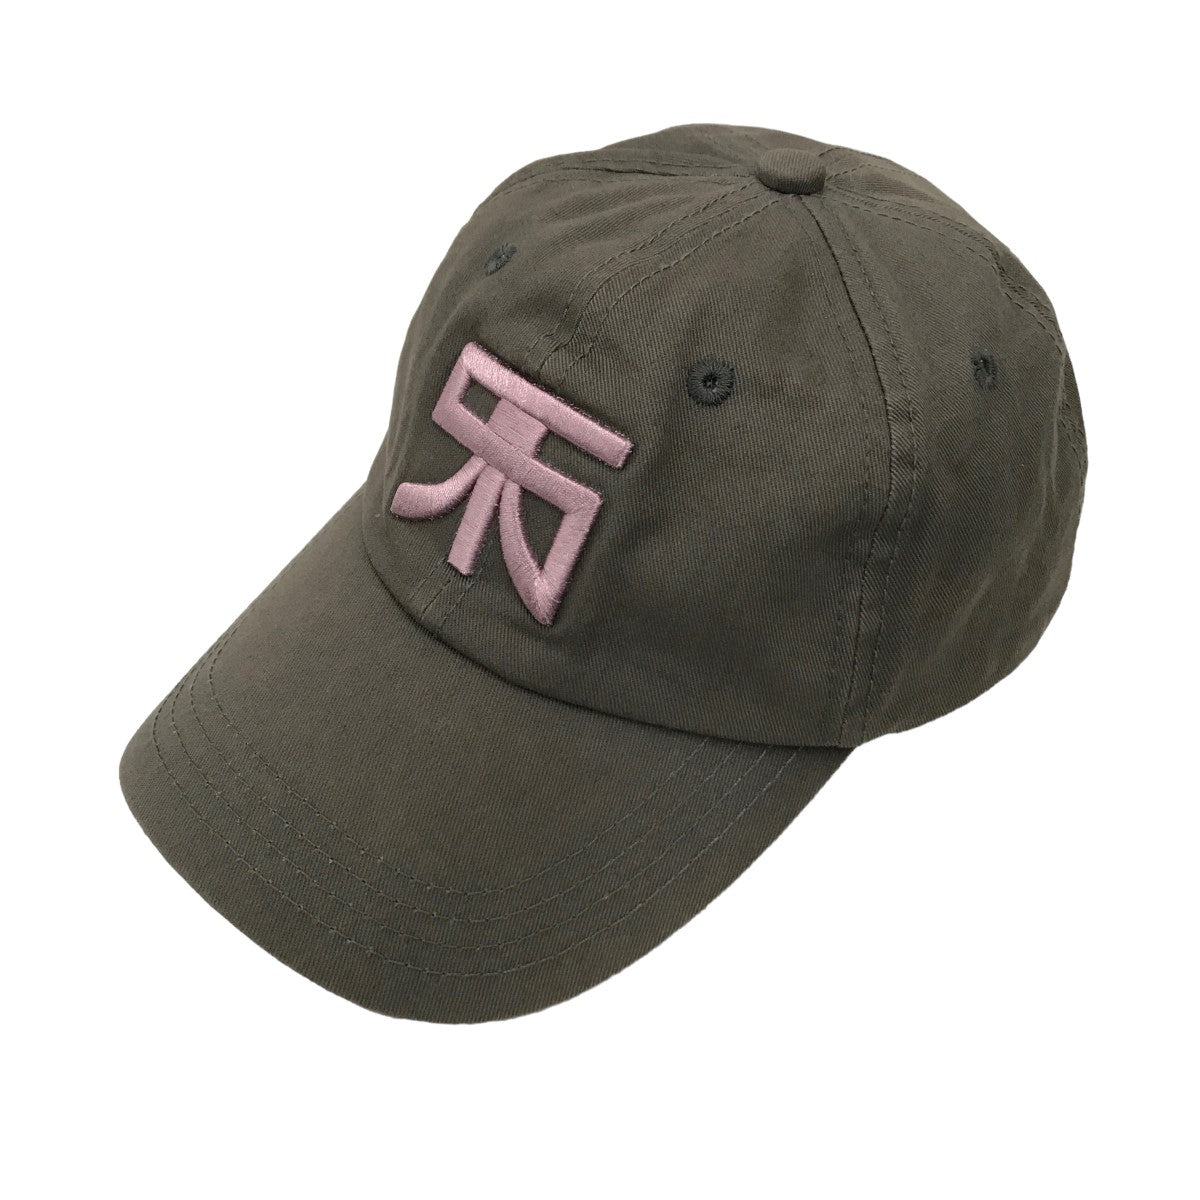 RAF SIMONS Cap with embroidered ラフシモンズラフシモンズ